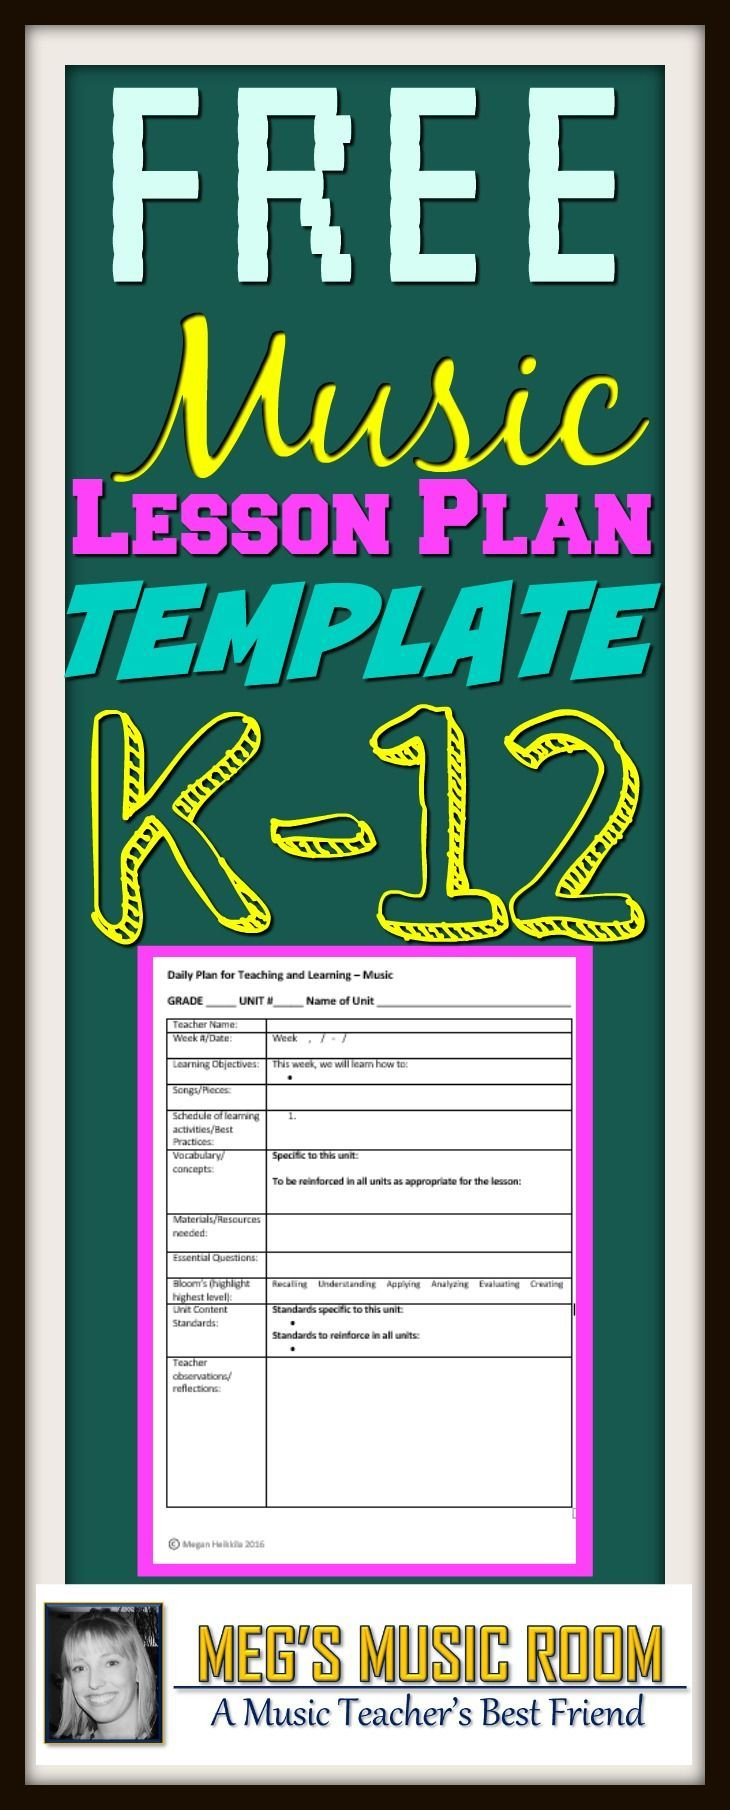 Music Lesson Plan Template - Elementary Music - Secondary